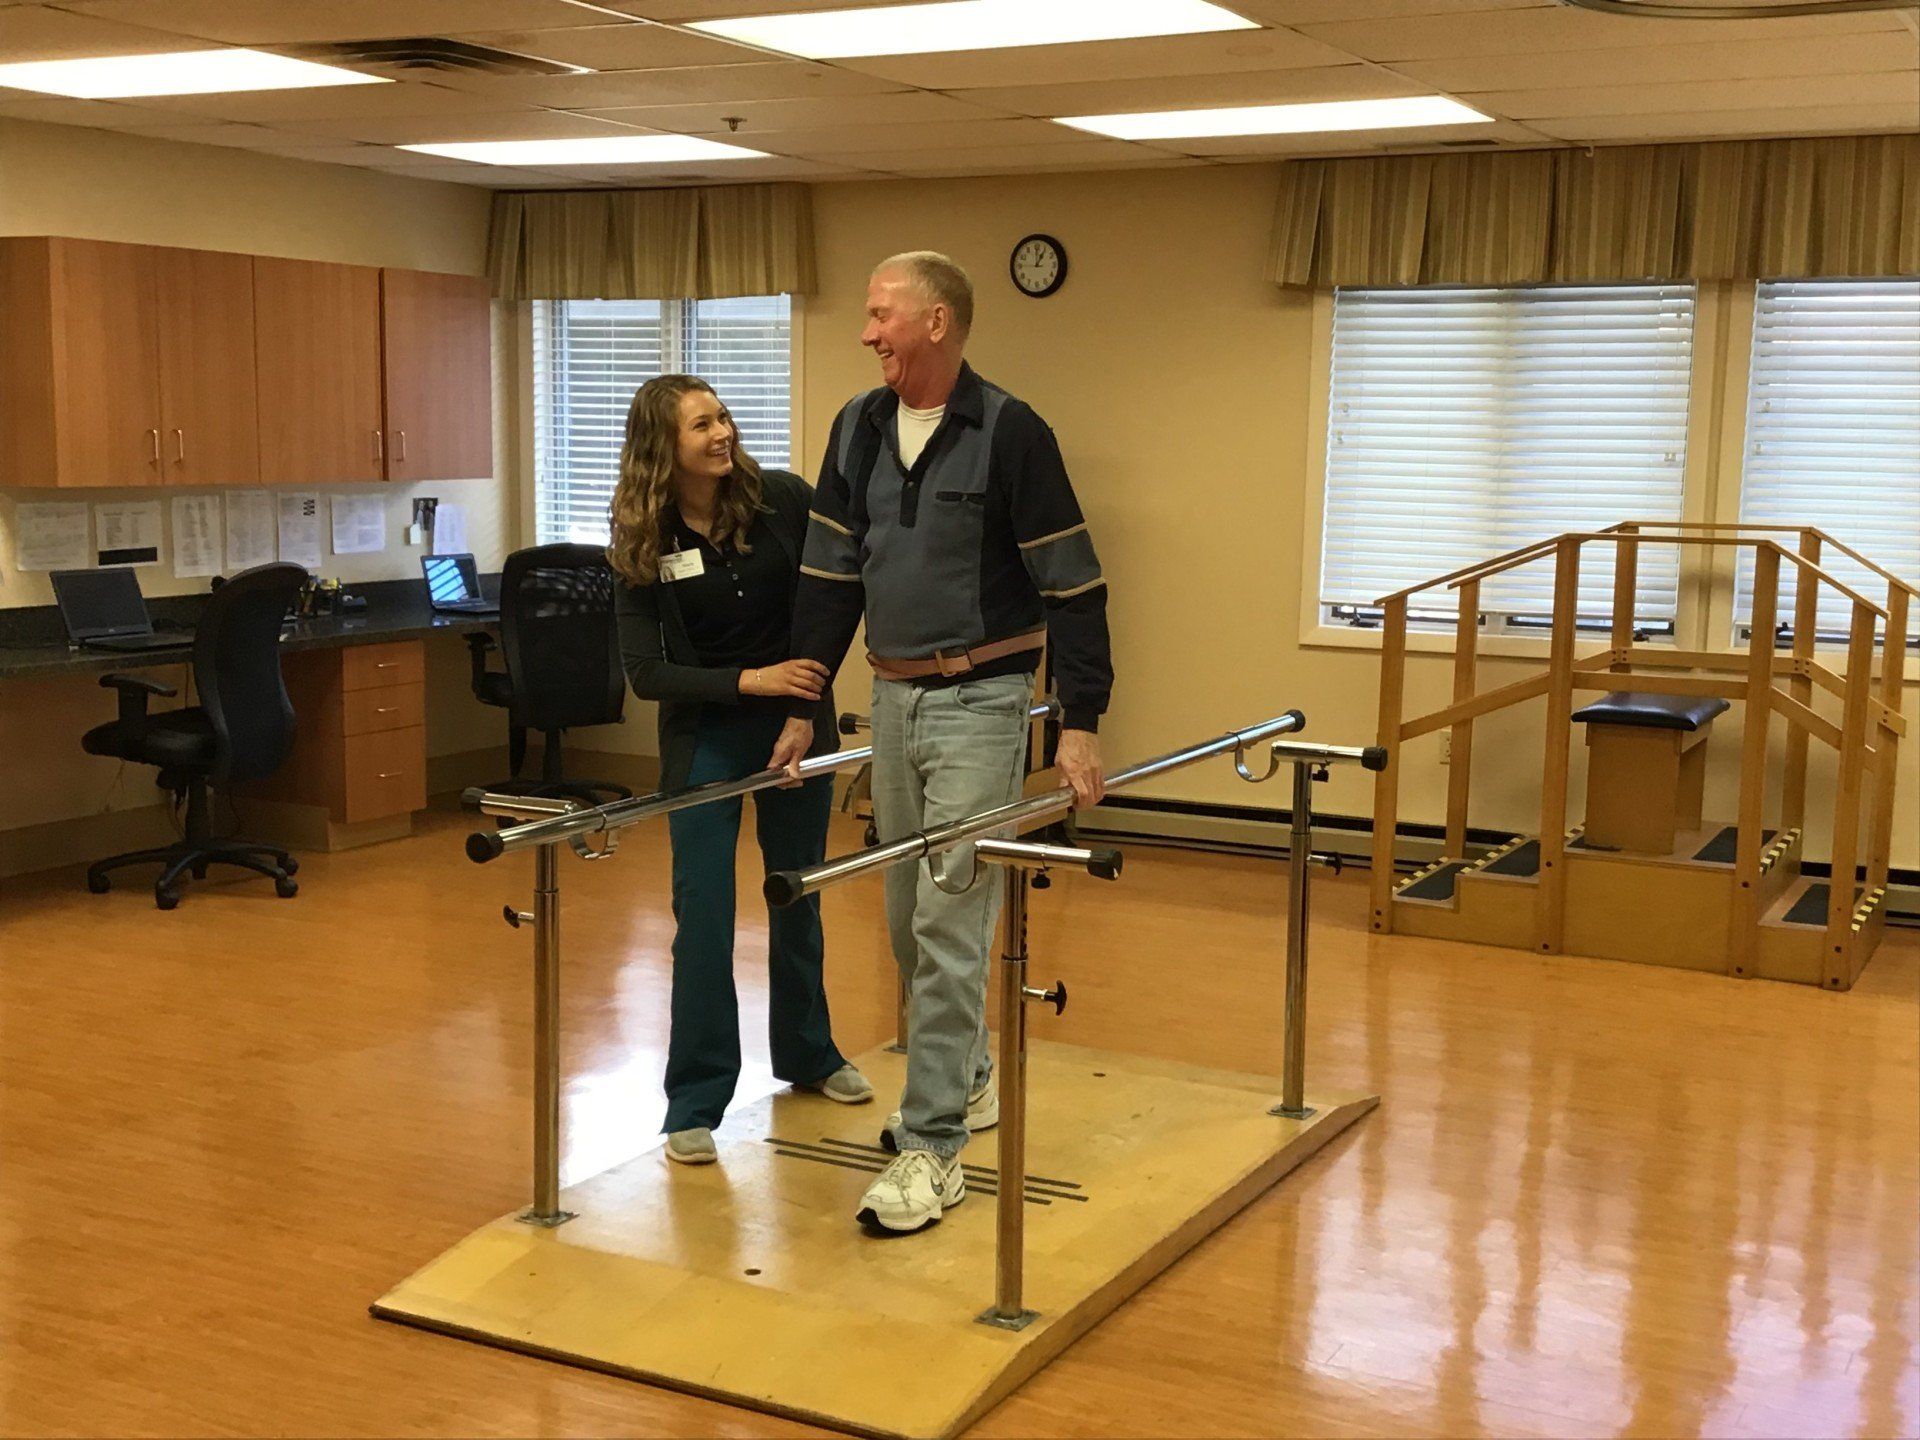 Female nurse rehabilitates middle-aged male on parallel bars at Parkway Pavilion Heath and Rehabilitation in Enfield, CT.